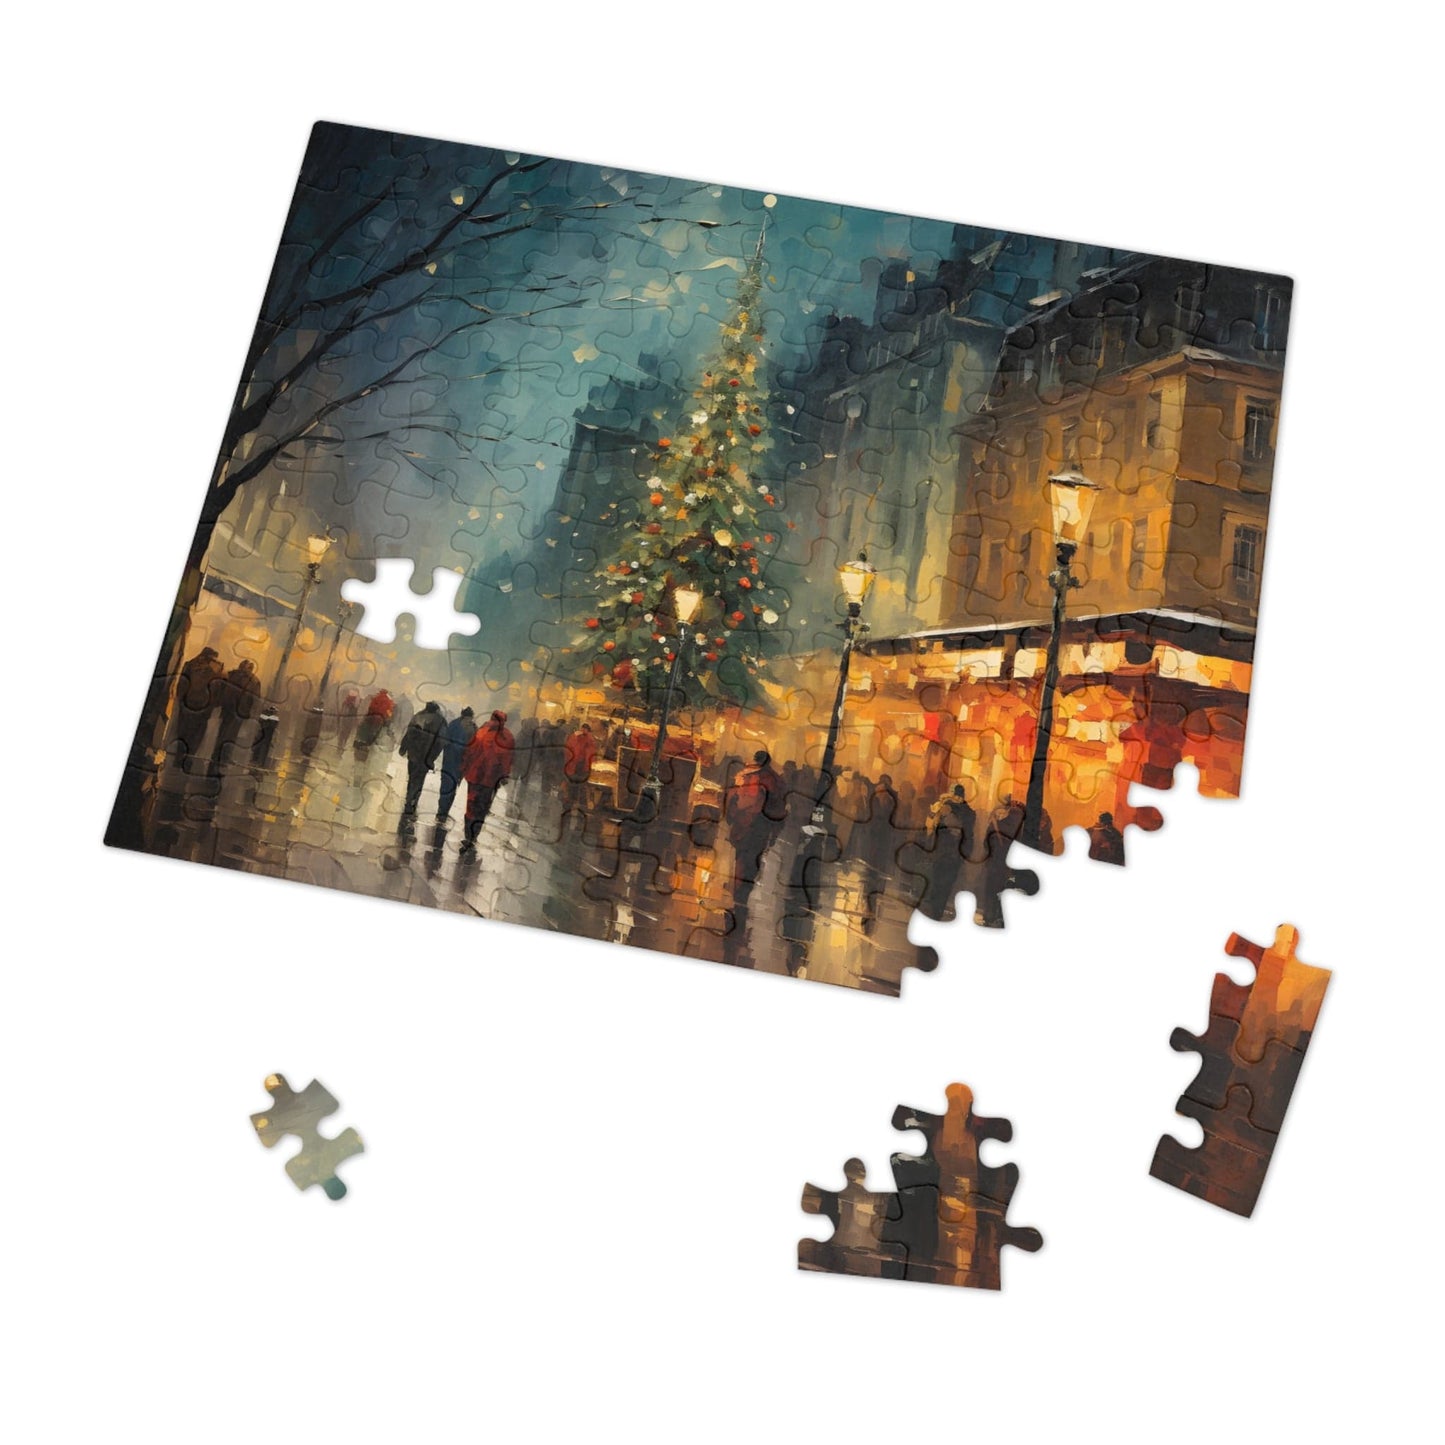 Christmas Jigsaw Puzzle: Vibrant Festive Market | Van Gogh Inspired | Customizable Sizes (30-1000 Pieces) | Ideal Gift for Family Game Night | Stress Relief for Kids & Adults